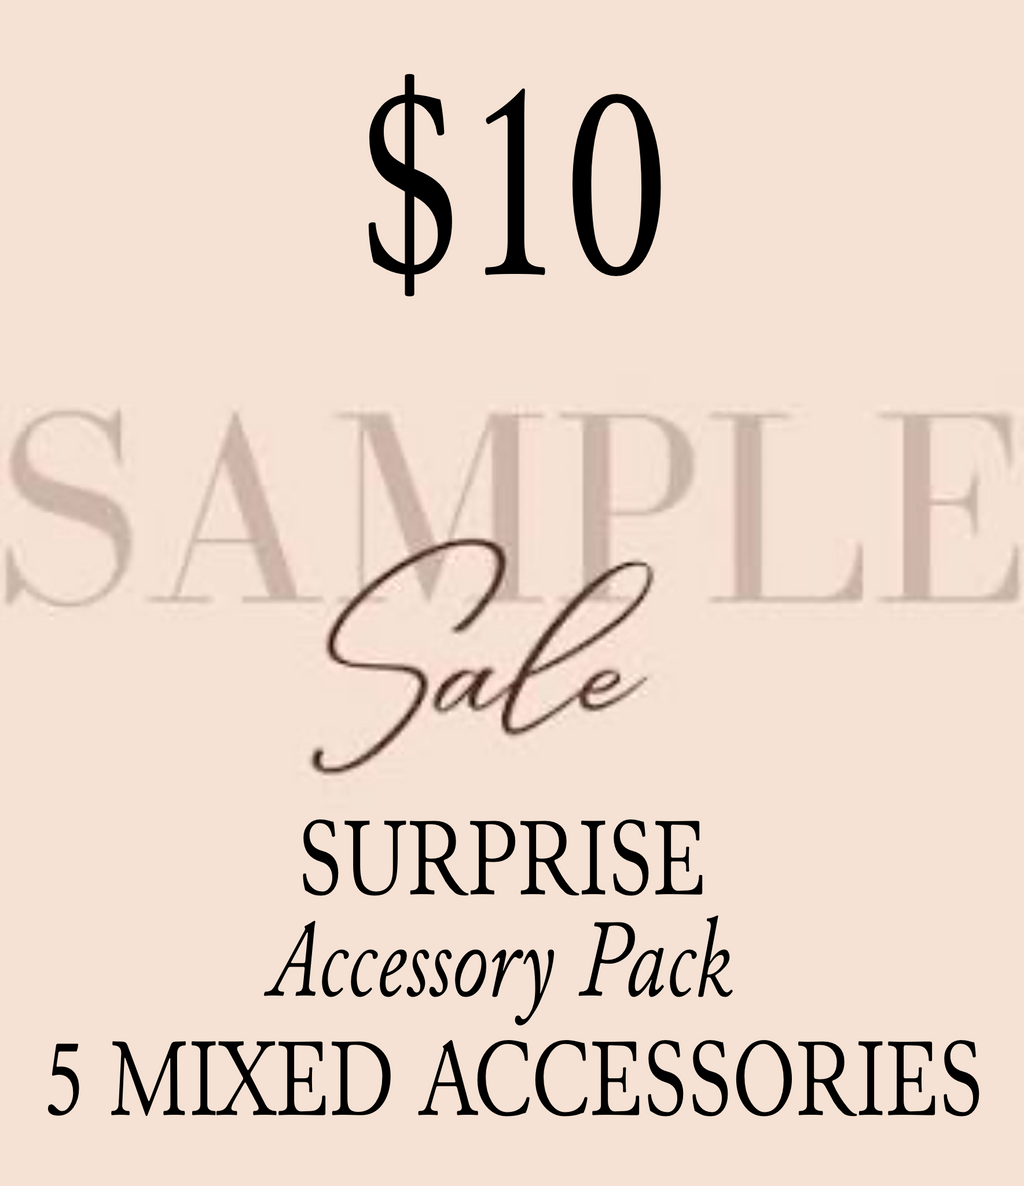 Surprise Sample Accessory Pack (one size)